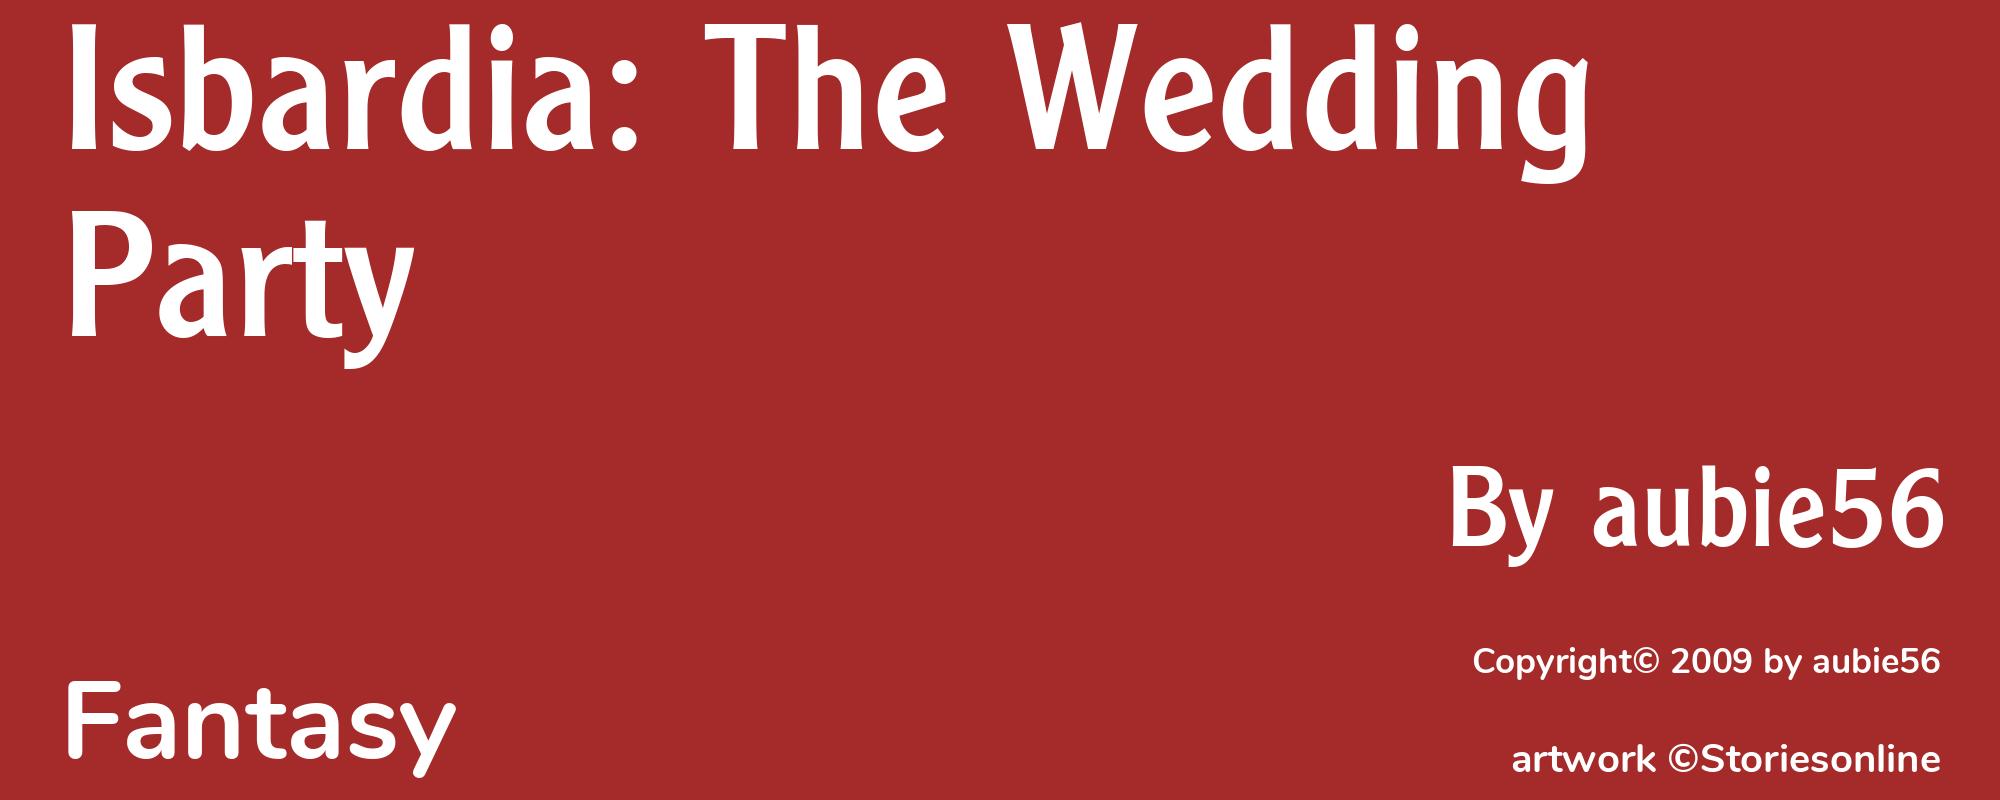 Isbardia: The Wedding Party - Cover